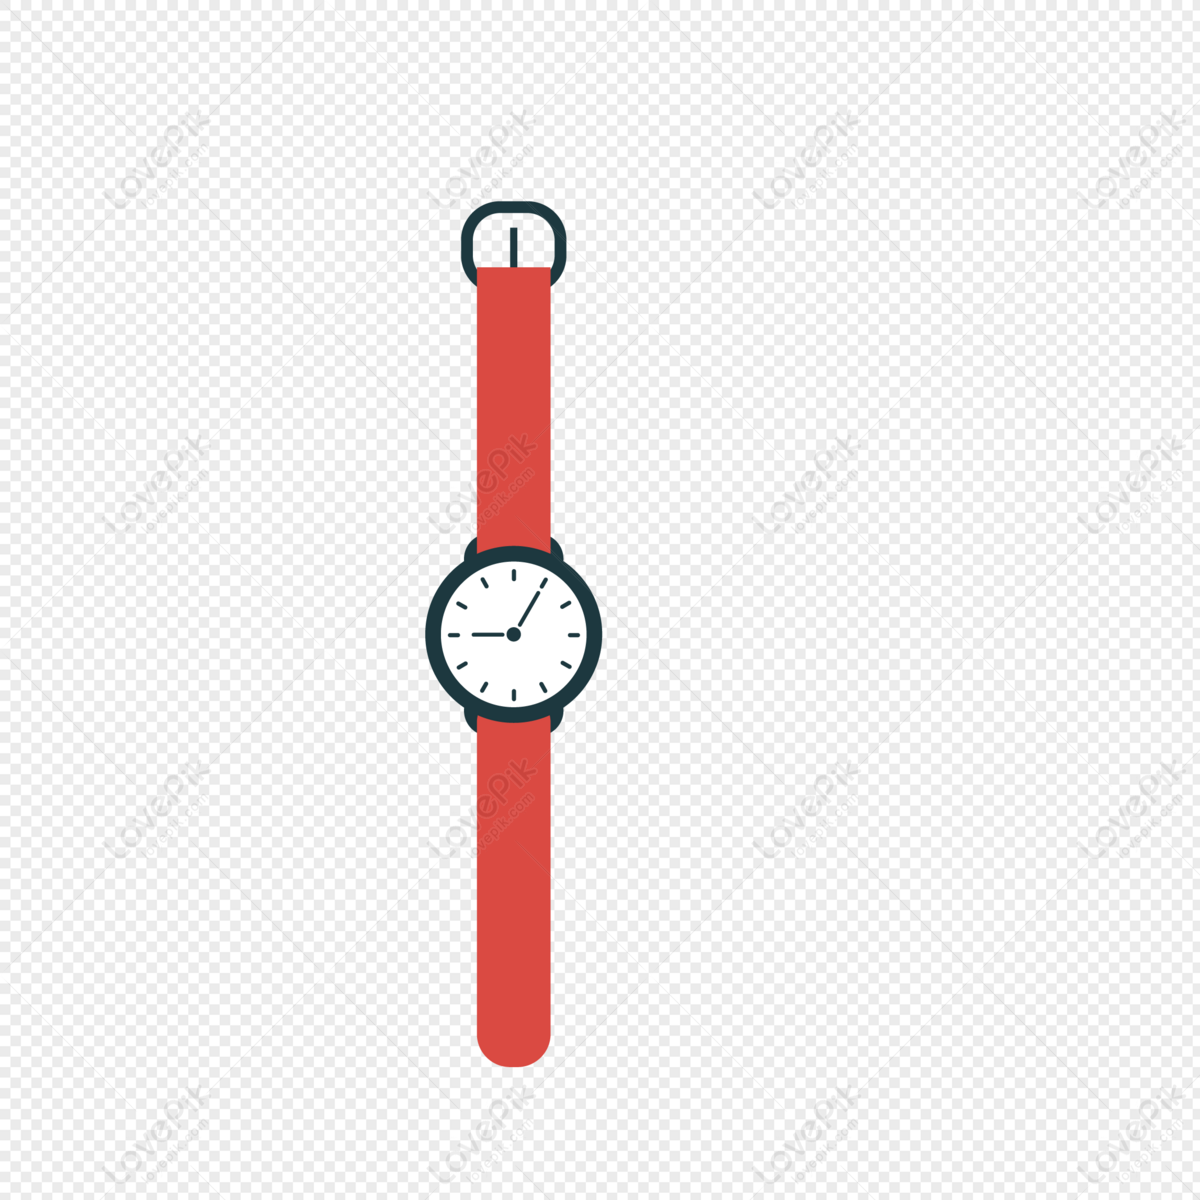 Wrist Watch PNG Transparent Image And Clipart Image For Free Download -  Lovepik | 400495957